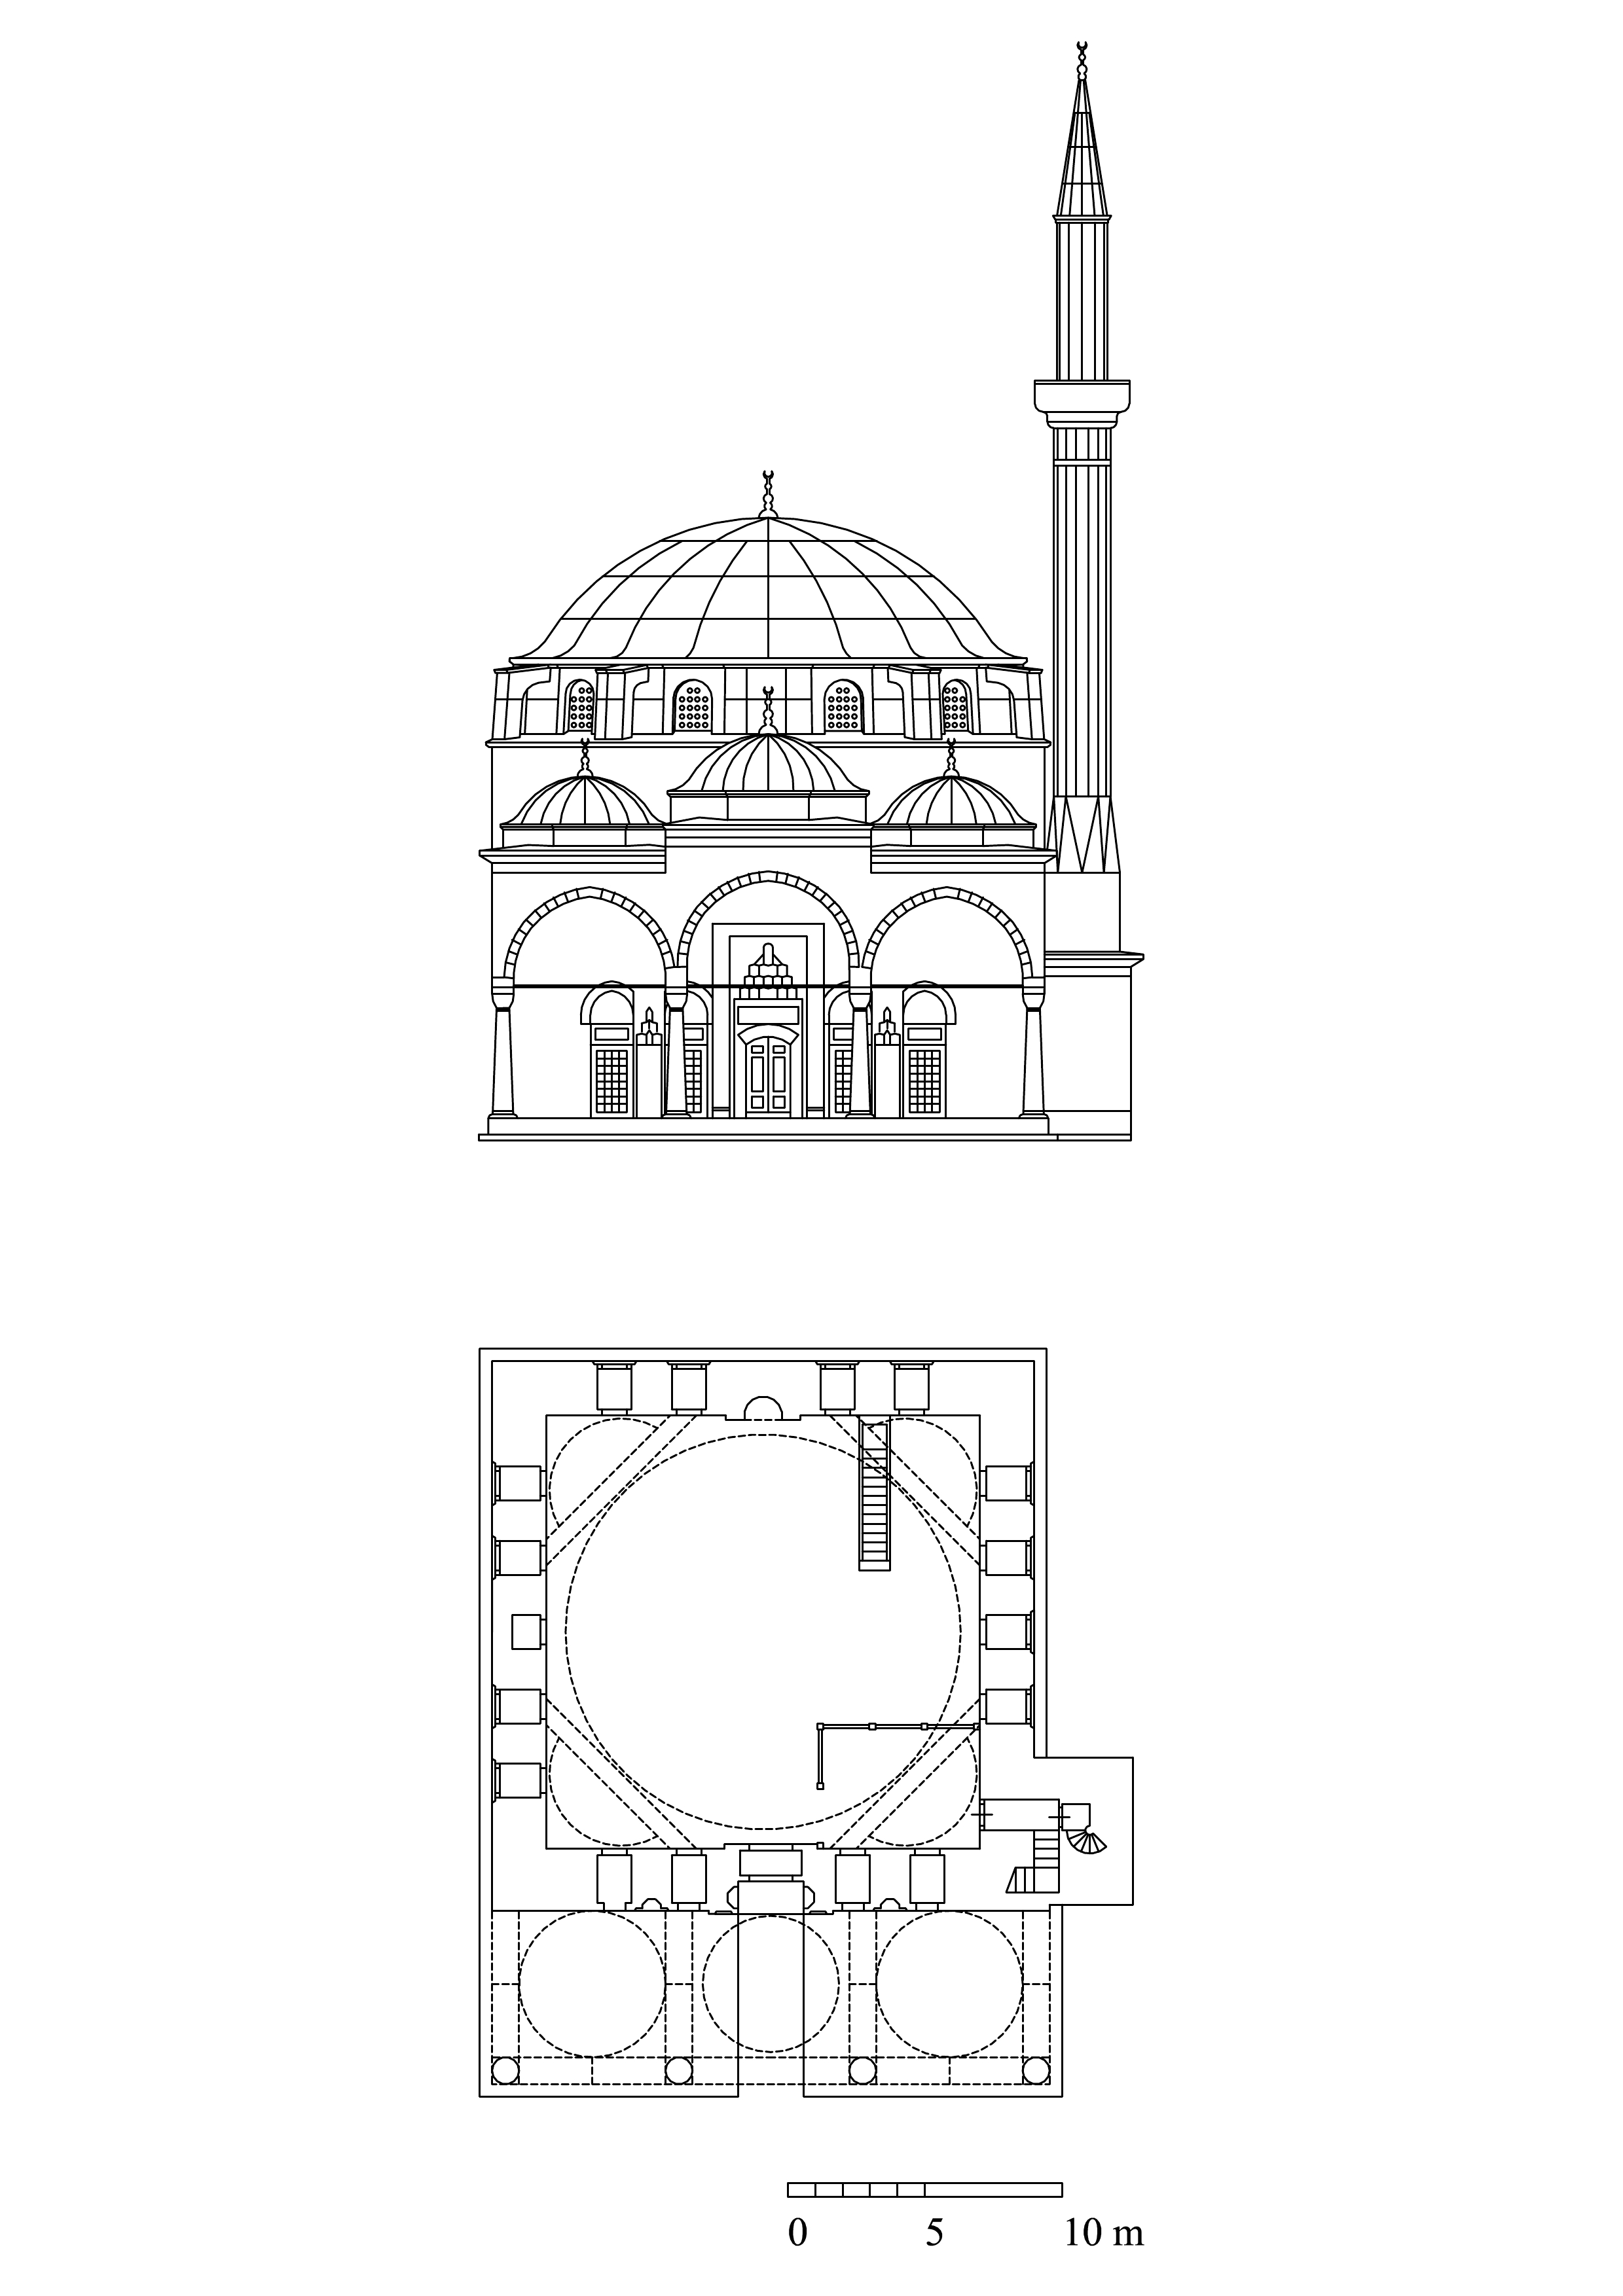 Floor plan and elevation of Cenabi Ahmed Pasa Mosque